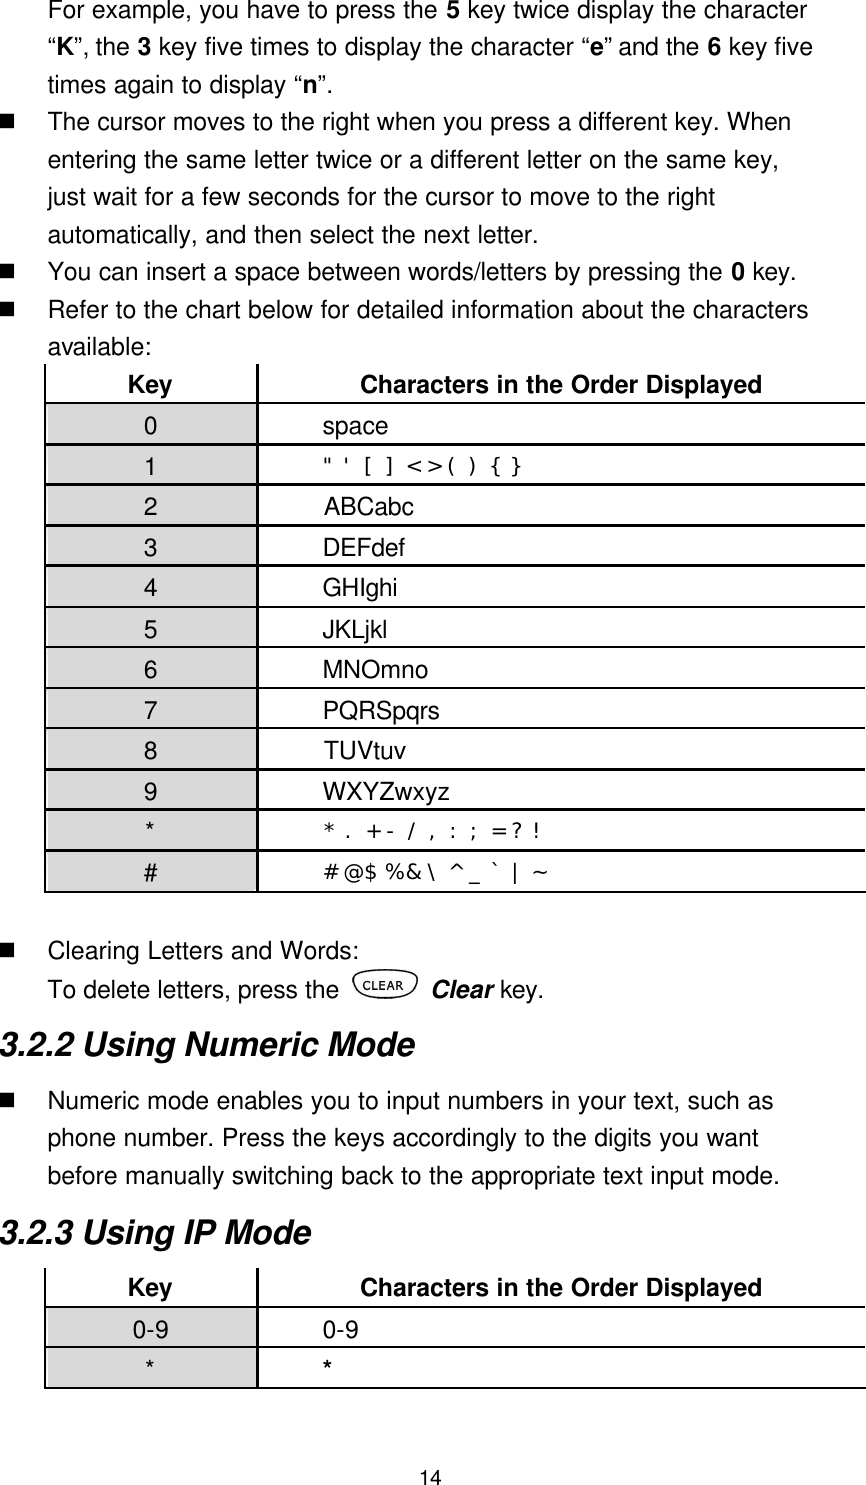  14 For example, you have to press the 5 key twice display the character “K”, the 3 key five times to display the character “e” and the 6 key five times again to display “n”. n The cursor moves to the right when you press a different key. When entering the same letter twice or a different letter on the same key, just wait for a few seconds for the cursor to move to the right automatically, and then select the next letter. n You can insert a space between words/letters by pressing the 0 key. n Refer to the chart below for detailed information about the characters available: Key Characters in the Order Displayed 0      space 1      &quot; &apos; [ ] &lt; &gt; ( ) { } 2      ABCabc 3      DEFdef 4      GHIghi 5      JKLjkl 6      MNOmno 7      PQRSpqrs 8      TUVtuv 9 WXYZwxyz * * . + - / , : ; = ? ! # # @ $ % &amp; \ ^ _ ` | ~  n Clearing Letters and Words: To delete letters, press the   Clear key. 3.2.2 Using Numeric Mode n Numeric mode enables you to input numbers in your text, such as phone number. Press the keys accordingly to the digits you want before manually switching back to the appropriate text input mode. 3.2.3 Using IP Mode Key Characters in the Order Displayed 0-9      0-9 *      *  